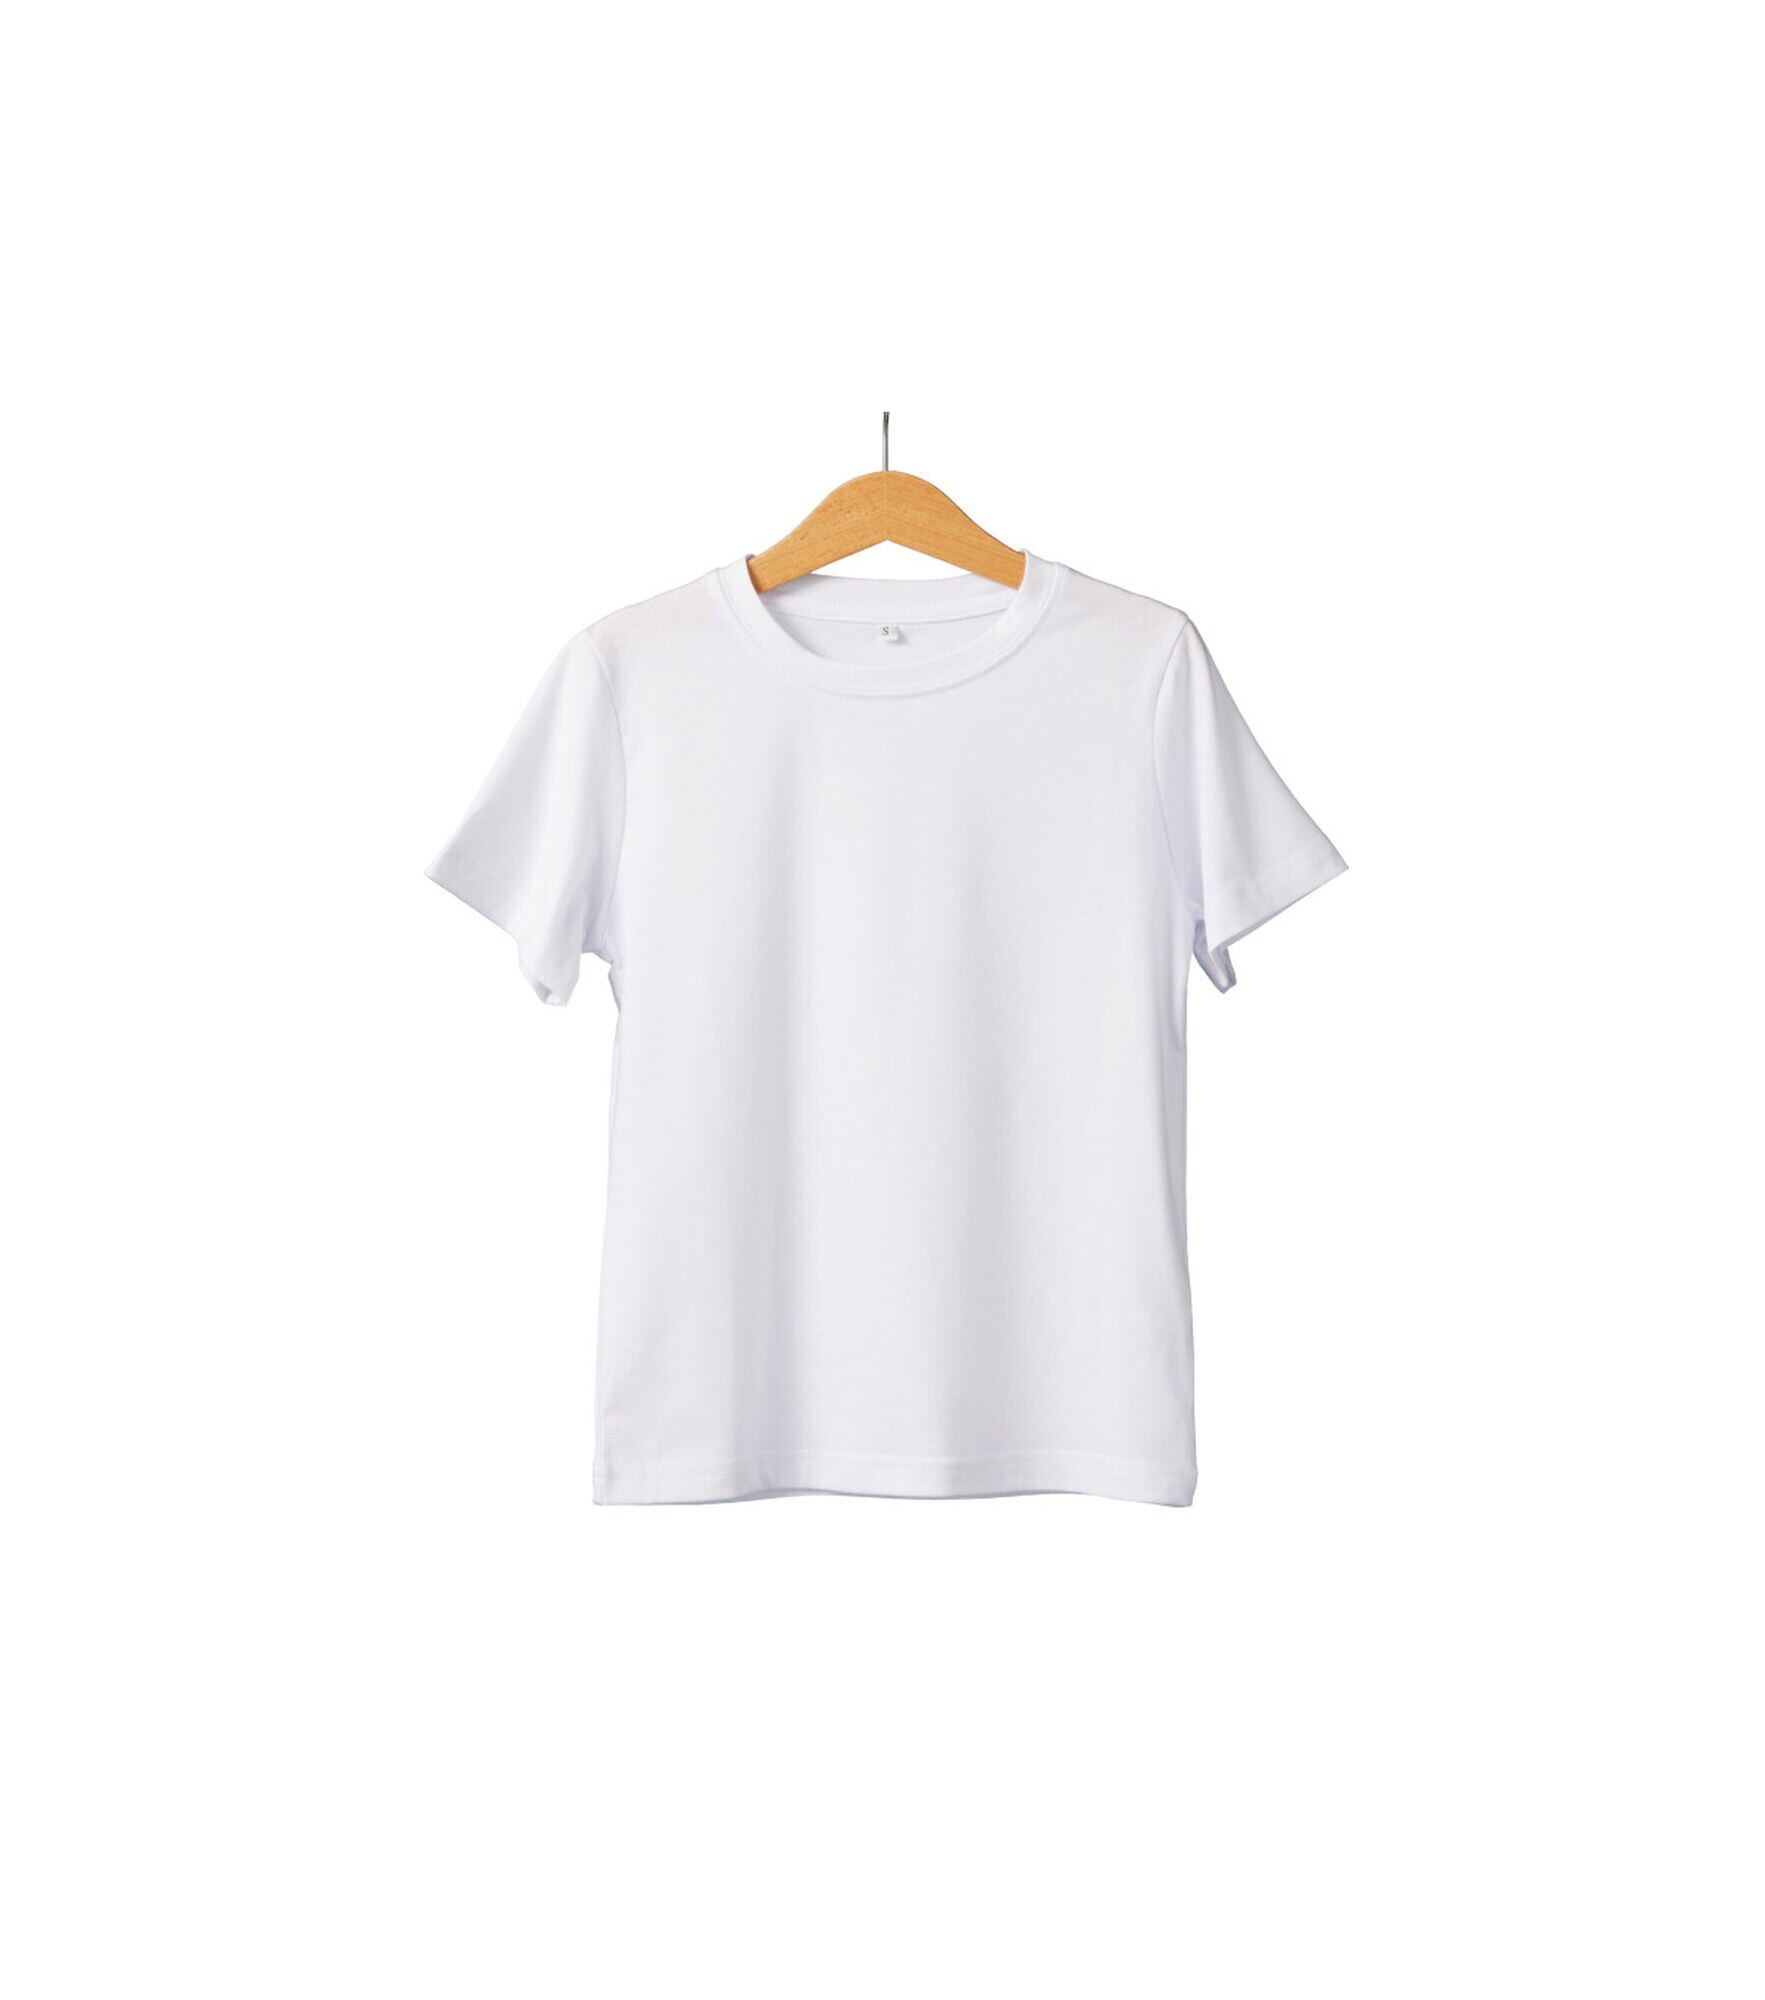 Cricut White Infusible Ink Men's Crew Neck T Shirt Blank